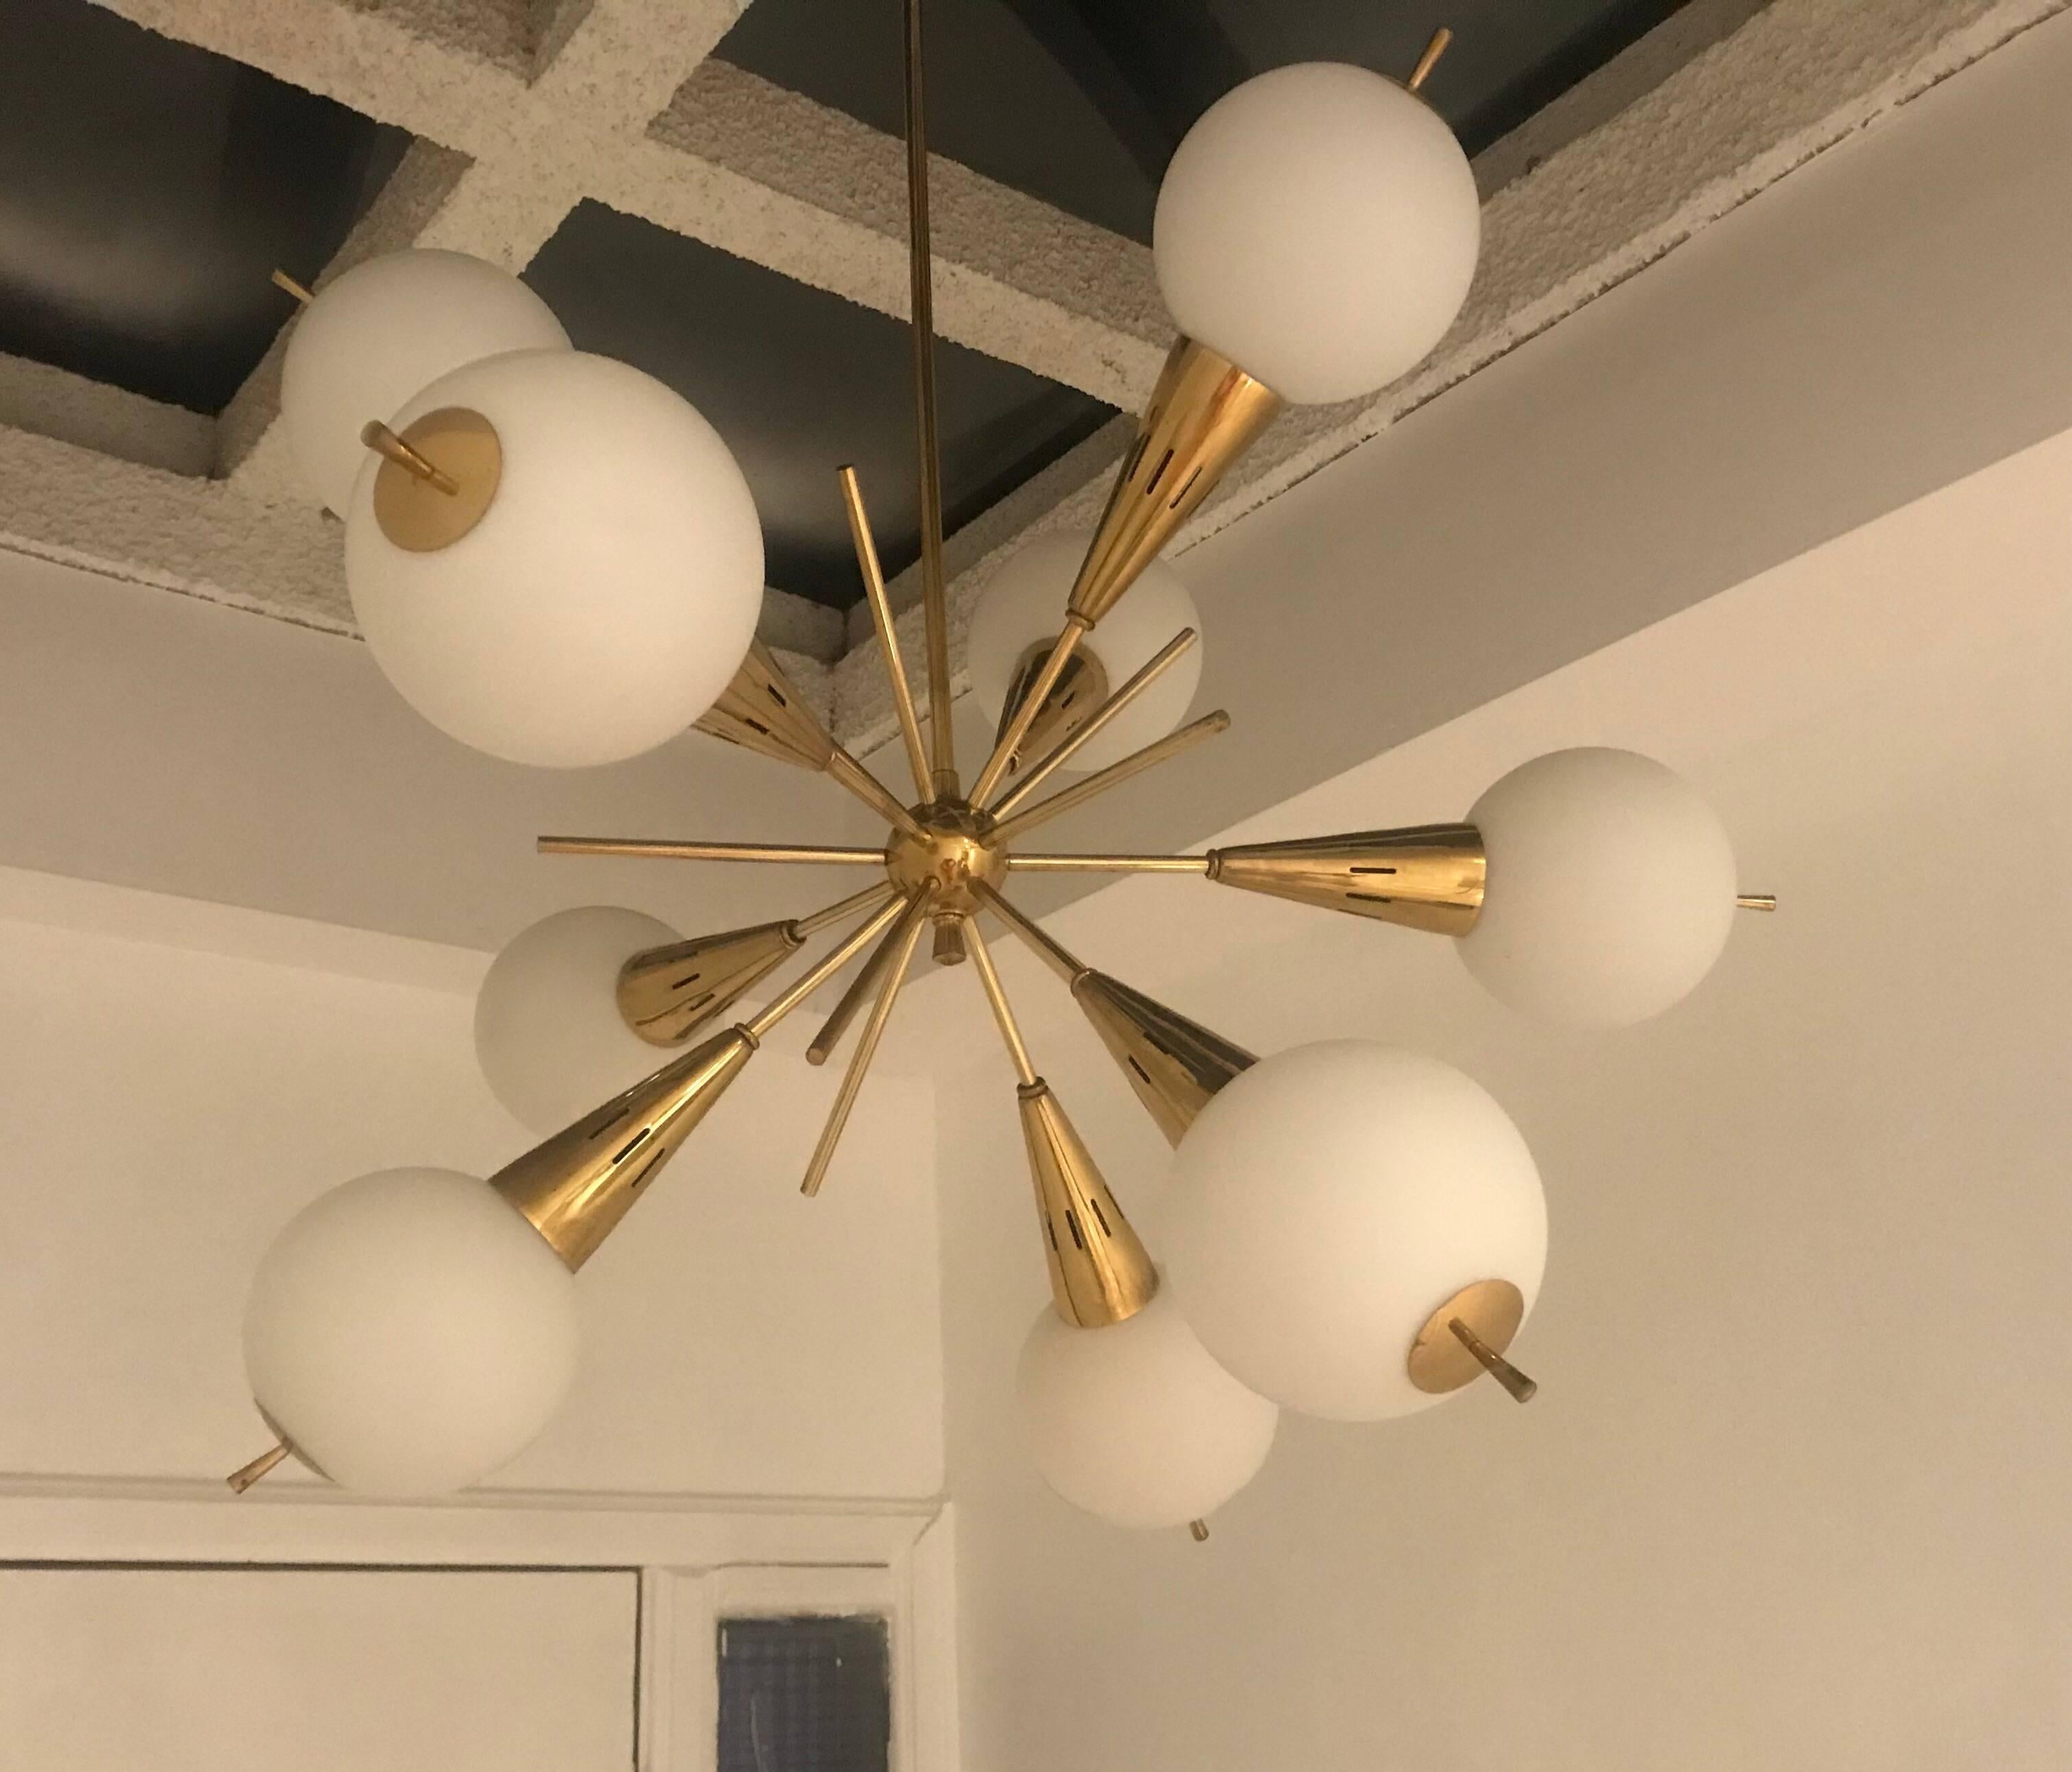 An original Italian pendant composed of a golden ages brass body with jutting rods and white glass globes forming an unusual Sputnik style. Newly rewired.Located in our New York City Chelsea location.